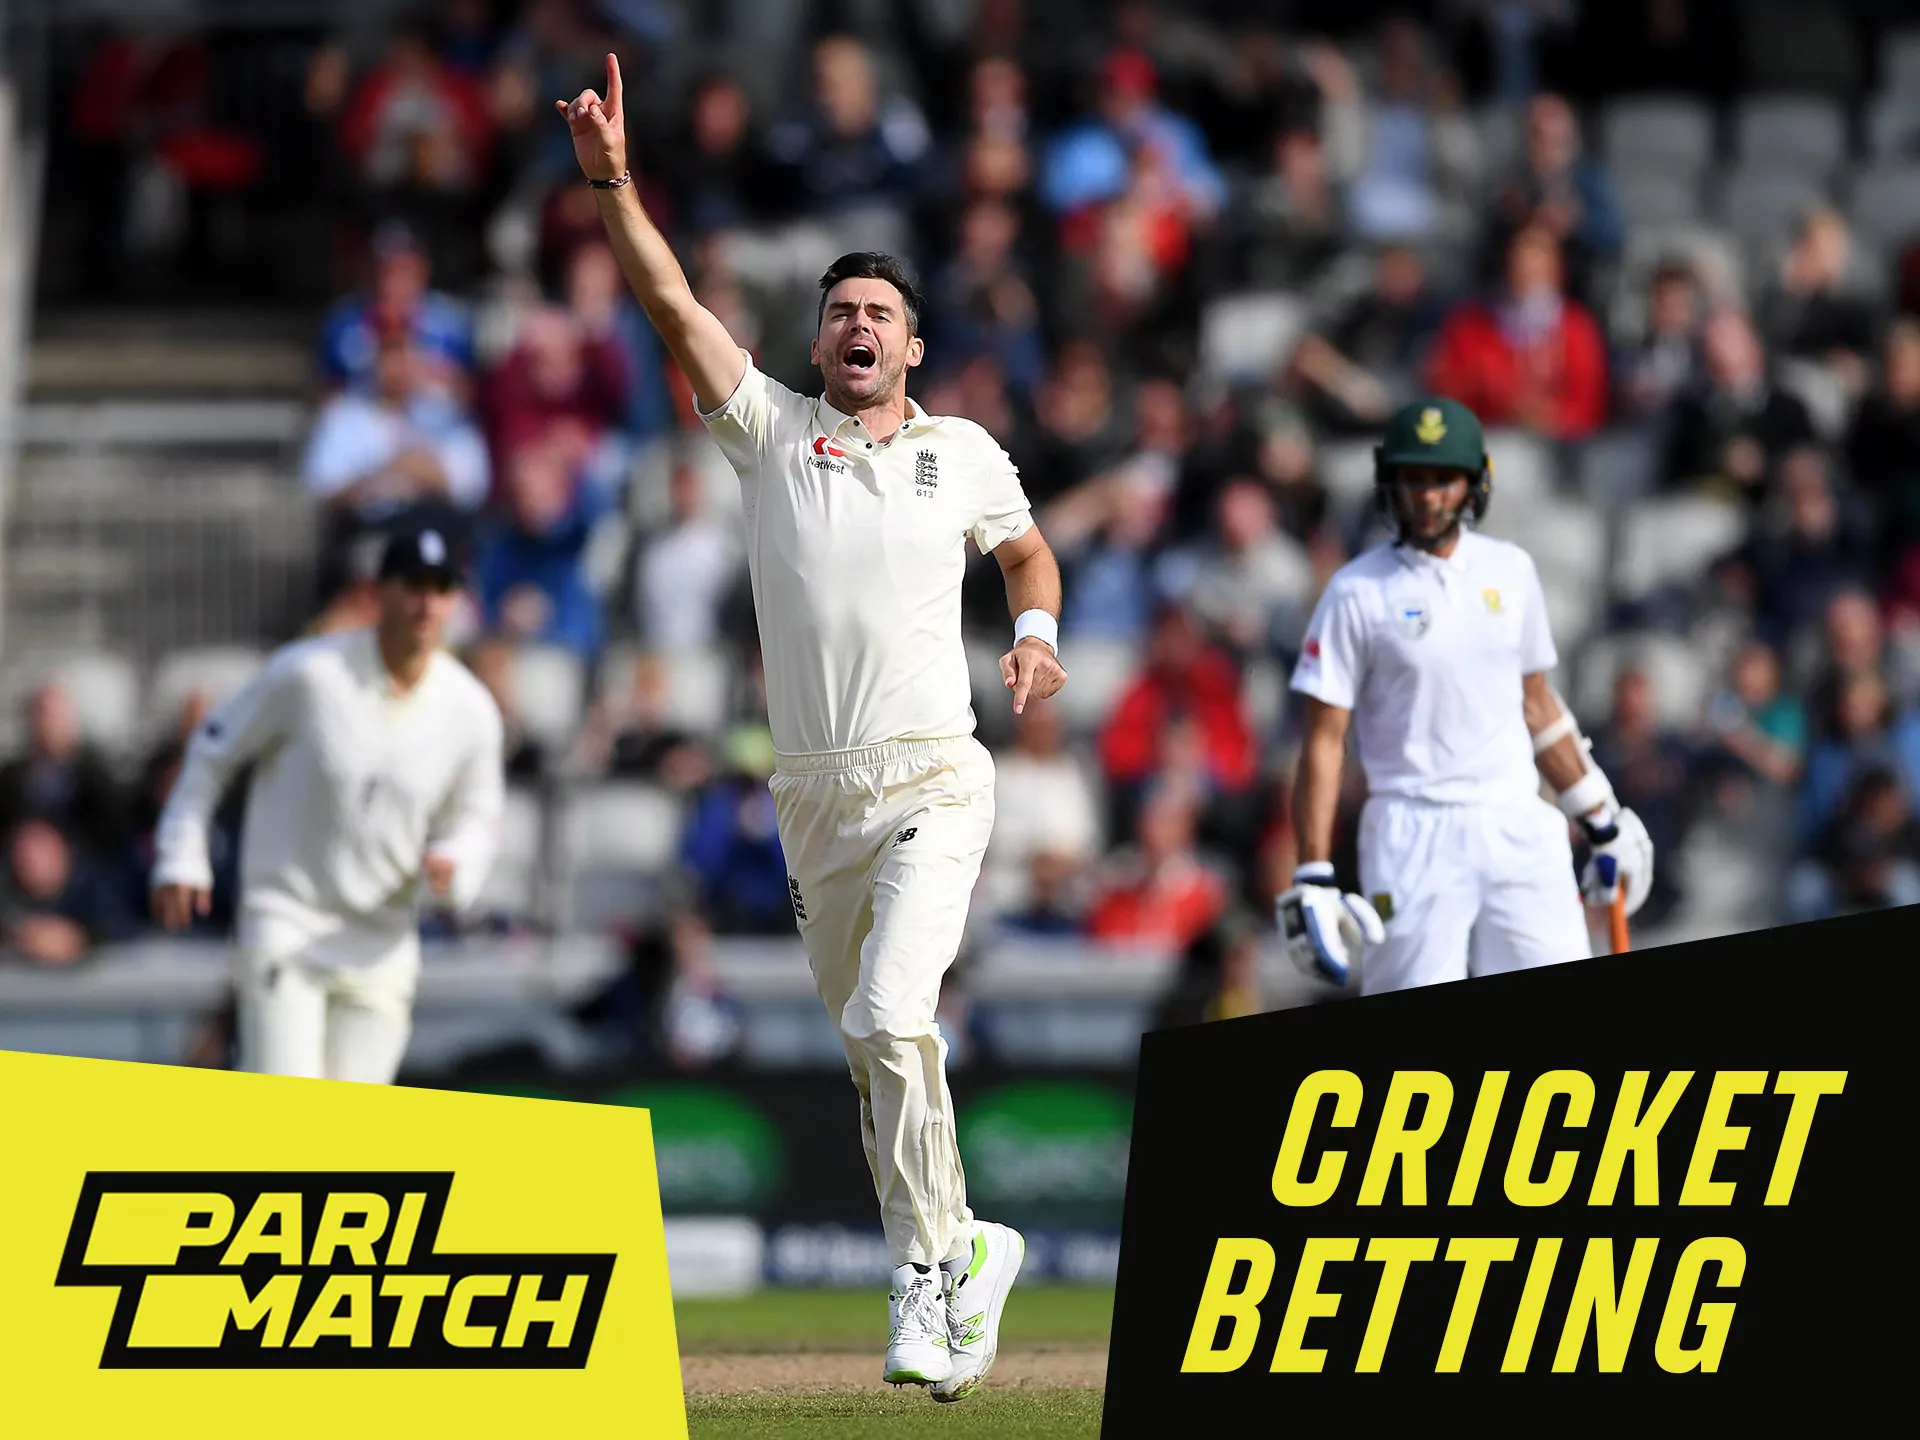 Cricket betting at Parimatch online betting site.